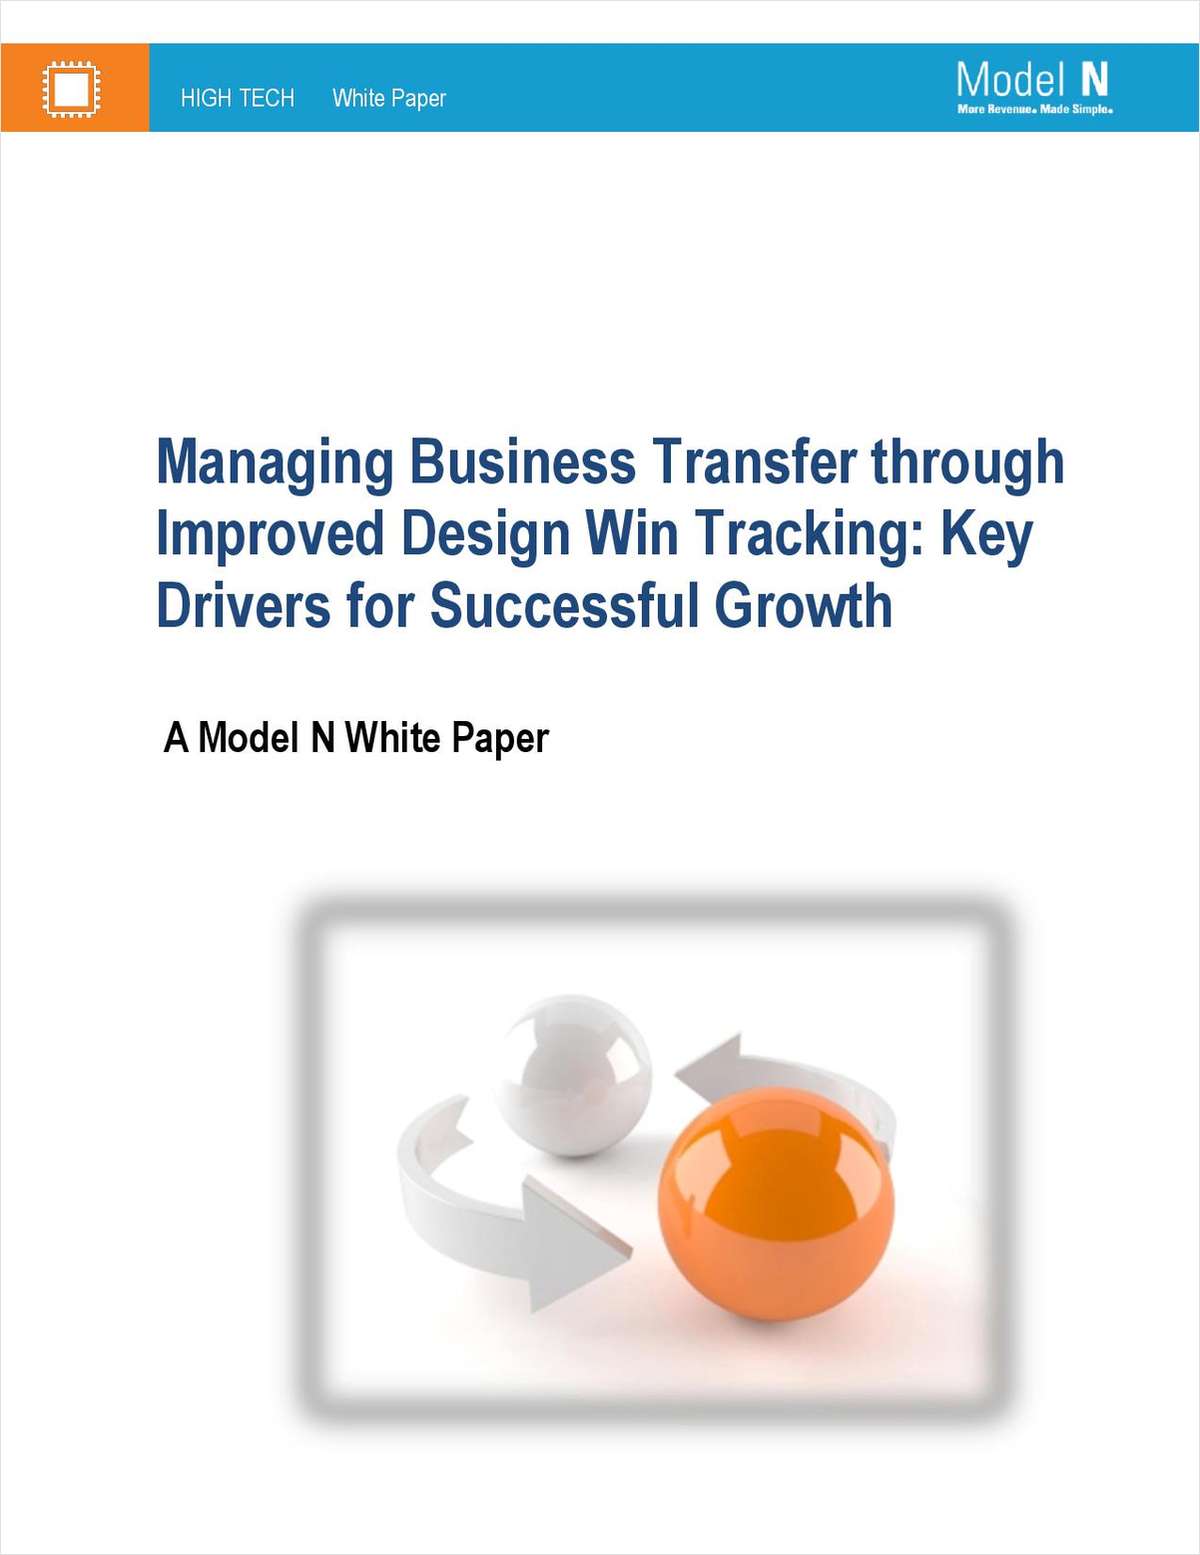 Managing Business Transfer through Improved Design Win Tracking: Key Drivers for Successful Growth